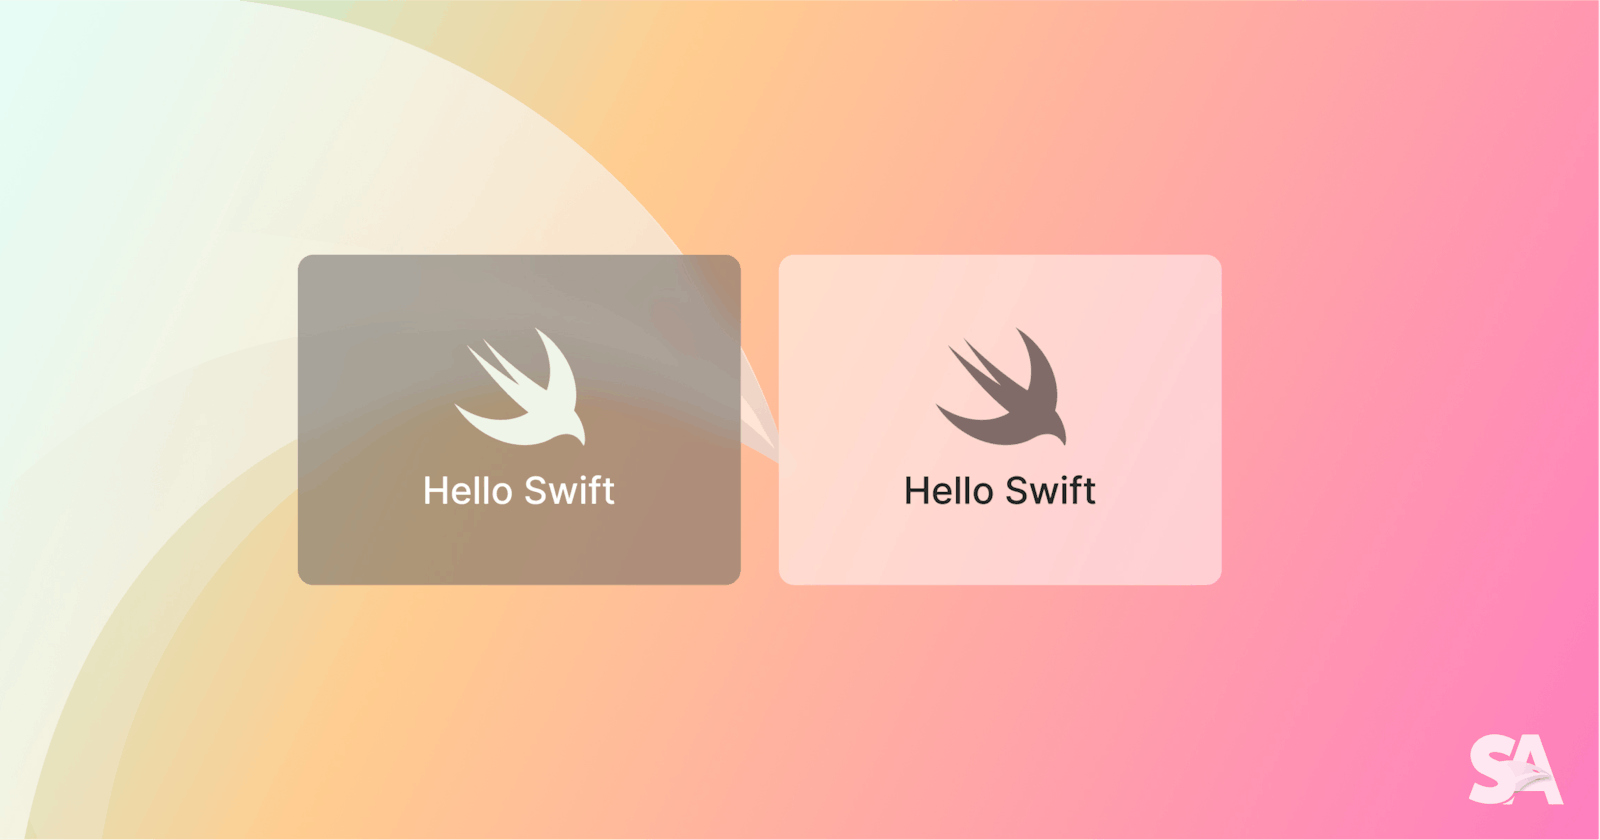 Visual Effects in SwiftUI